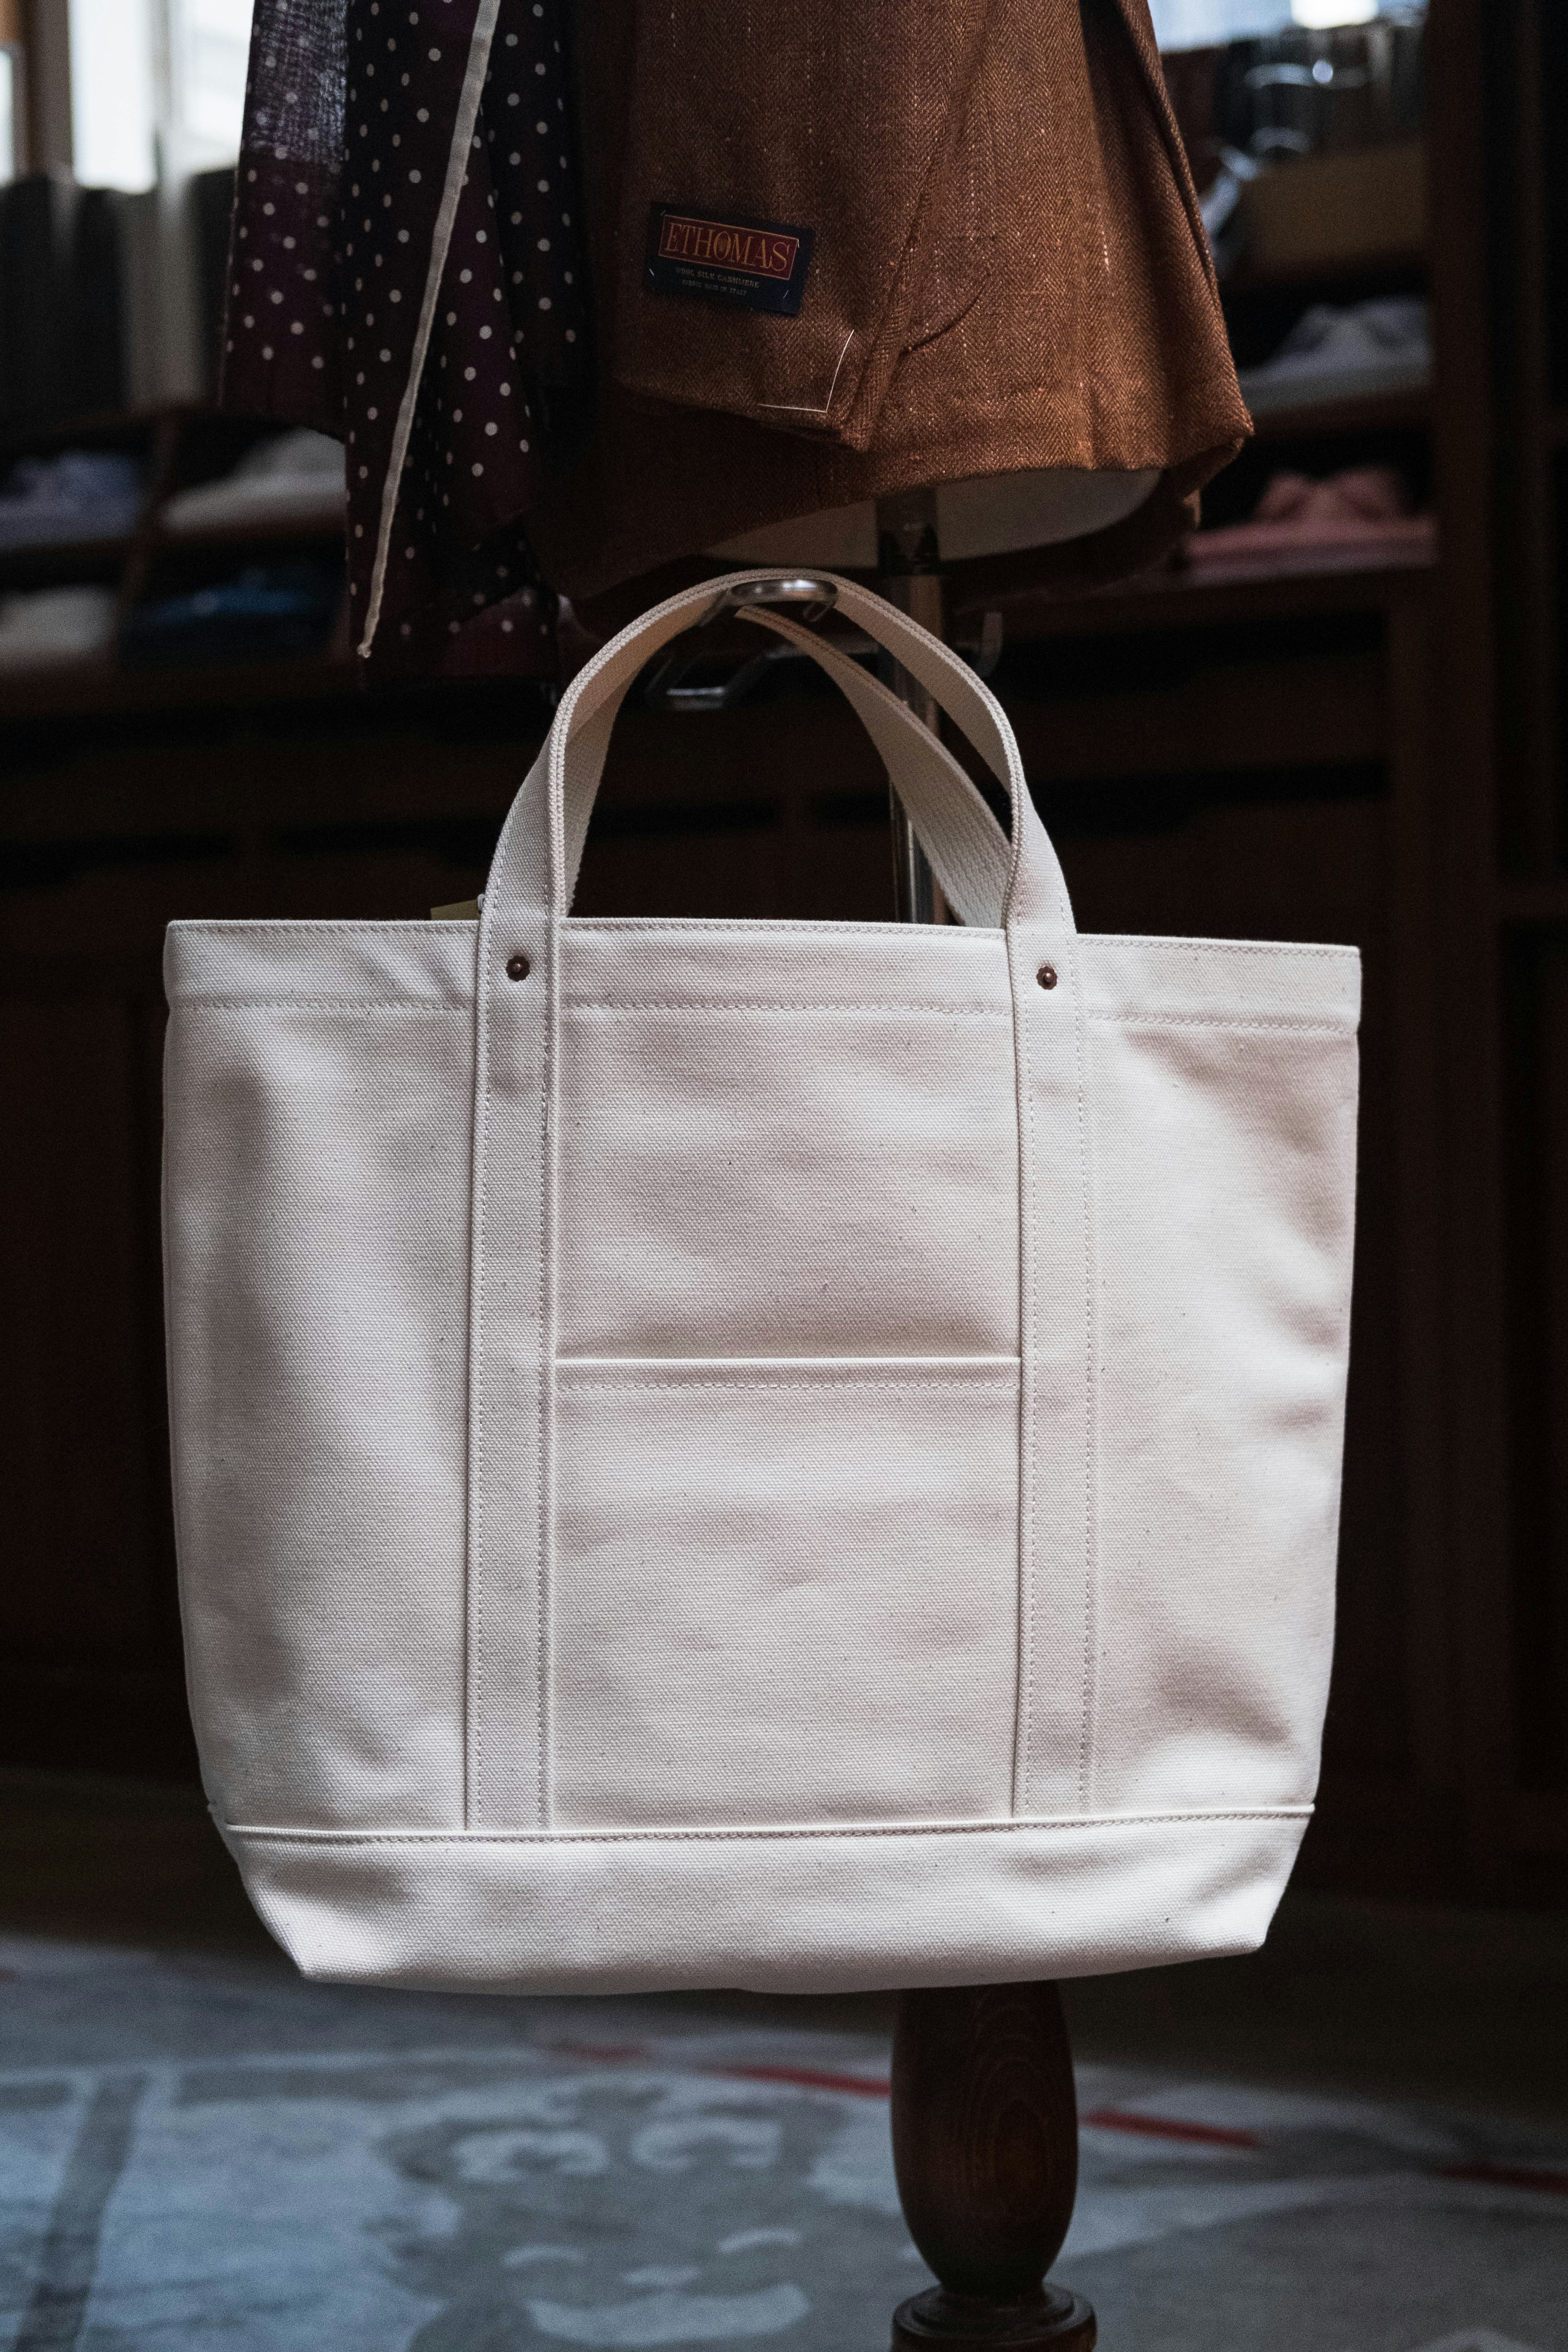 History of Merch: Tote Bags — commonsku Blog